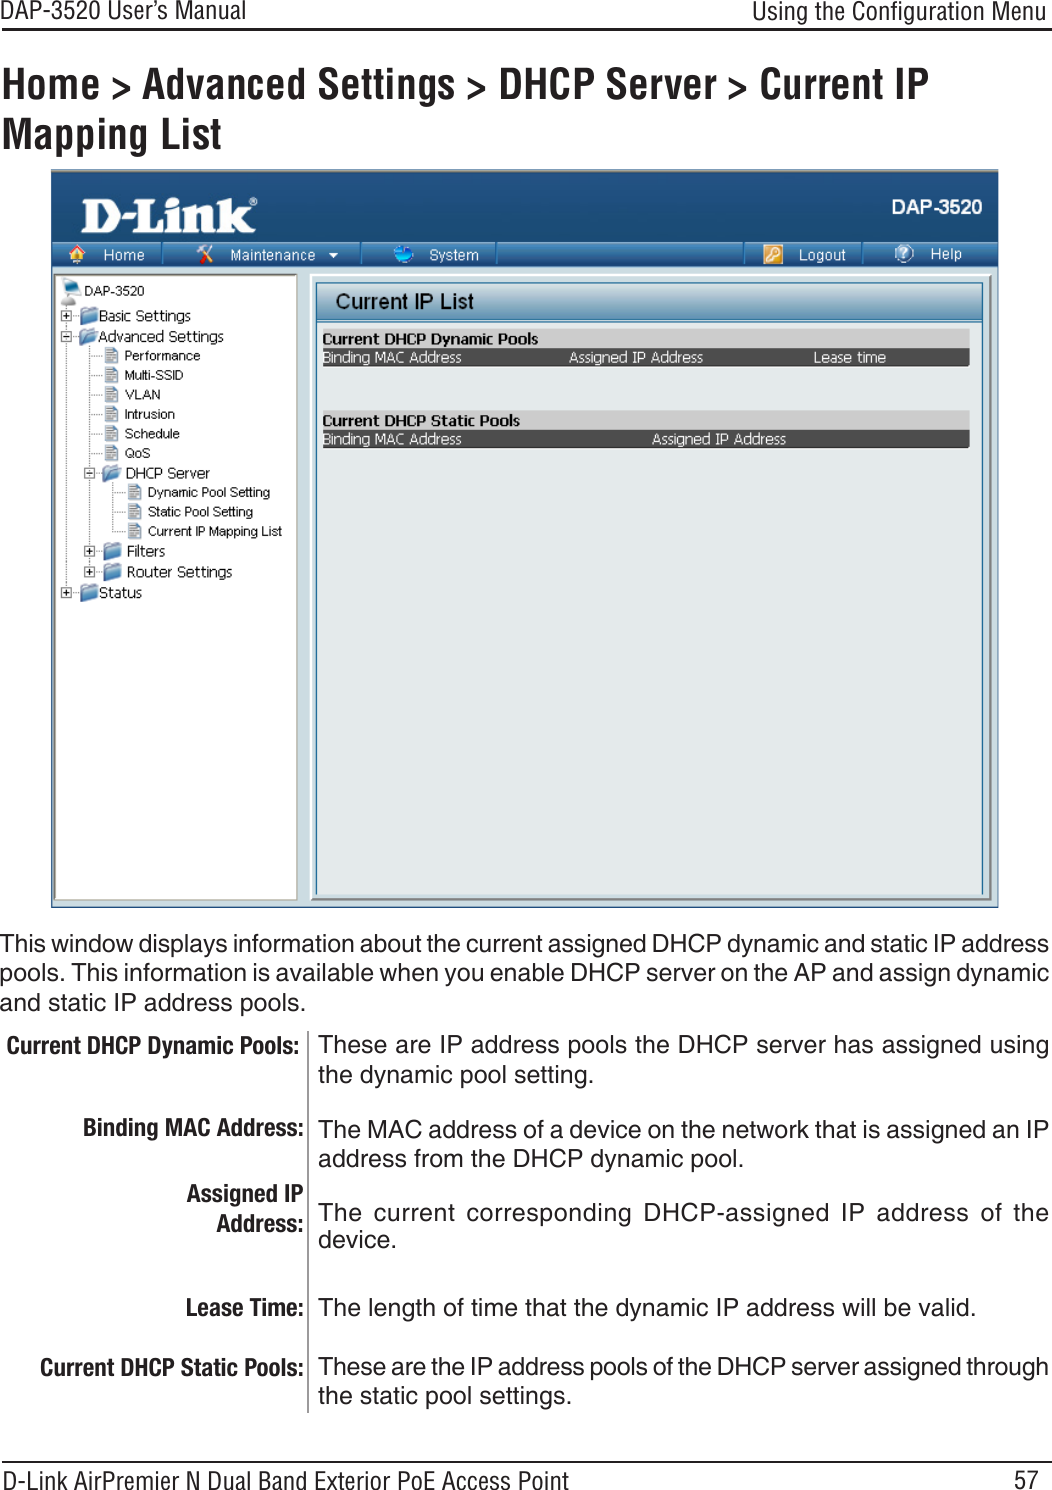 57DAP-3520 User’s Manual D-Link AirPremier N Dual Band Exterior PoE Access PointUsing the Conﬁguration MenuHome &gt; Advanced Settings &gt; DHCP Server &gt; Current IP Mapping ListThese are IP address pools the DHCP server has assigned using the dynamic pool setting. This window displays information about the current assigned DHCP dynamic and static IP address pools. This information is available when you enable DHCP server on the AP and assign dynamic and static IP address pools.Current DHCP Dynamic Pools:Binding MAC Address:Lease Time:Current DHCP Static Pools:The MAC address of a device on the network that is assigned an IP address from the DHCP dynamic pool.The  current  corresponding  DHCP-assigned  IP  address  of  the device.The length of time that the dynamic IP address will be valid.These are the IP address pools of the DHCP server assigned through the static pool settings. Assigned IP Address: